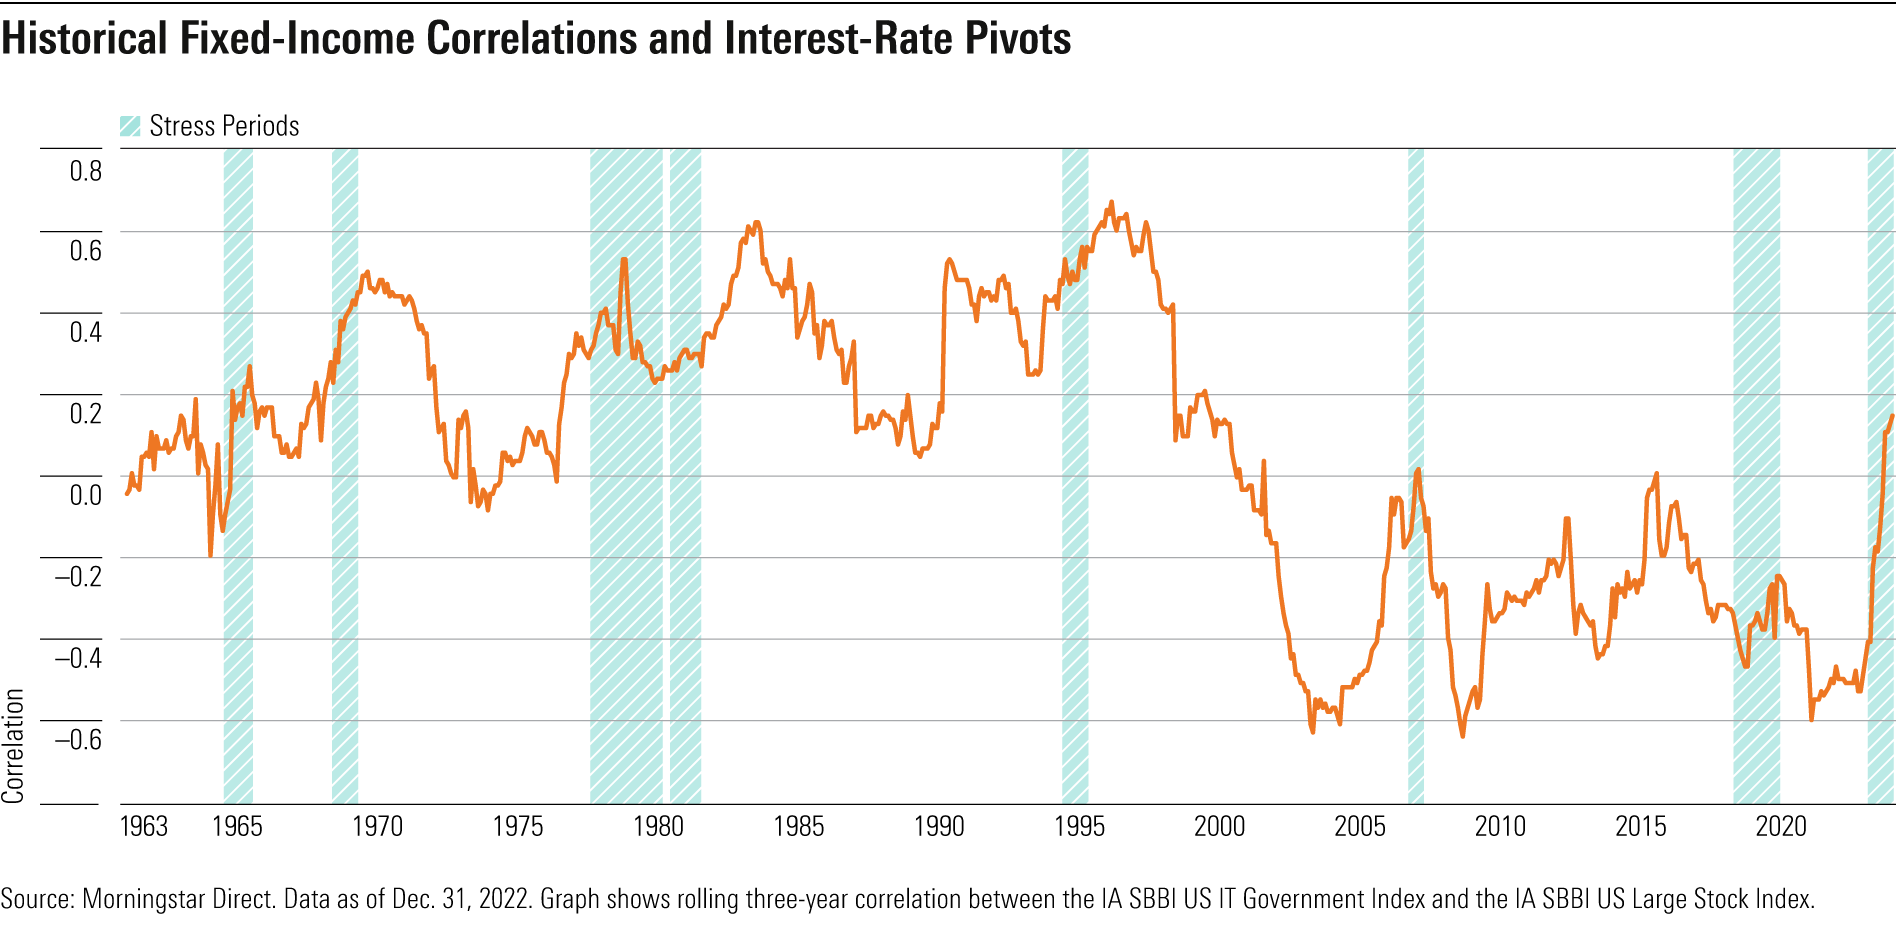 Historical Fixed-Income Correlations and Interest-Rate Pivots